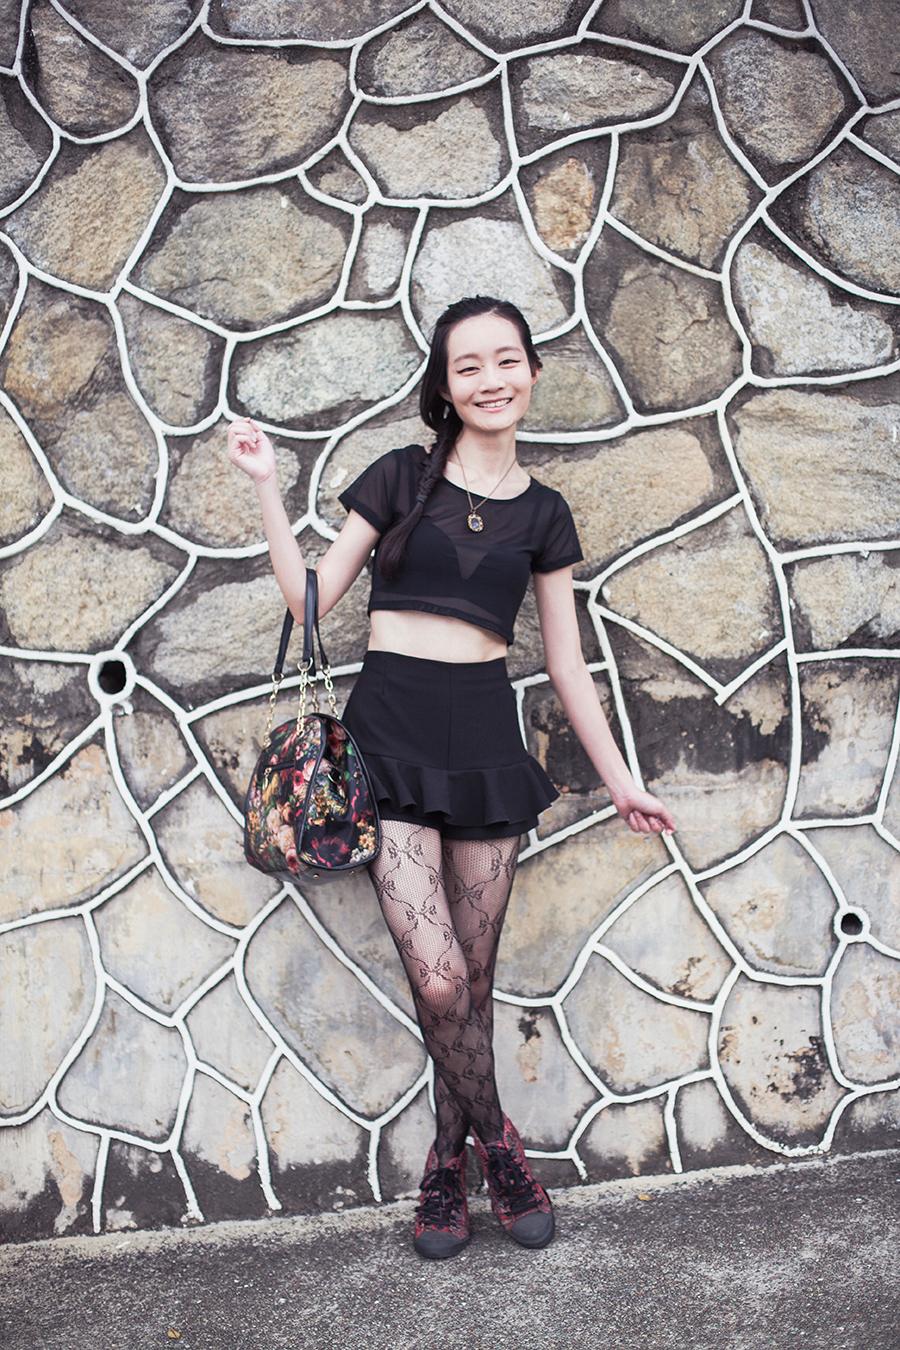 WholesaleBuying mesh crop top, Uniqlo bra, Topshop ribbon lace tights, Dressin floral bag, McQ x Puma high top sneakers, Simply Willow emerald necklace.